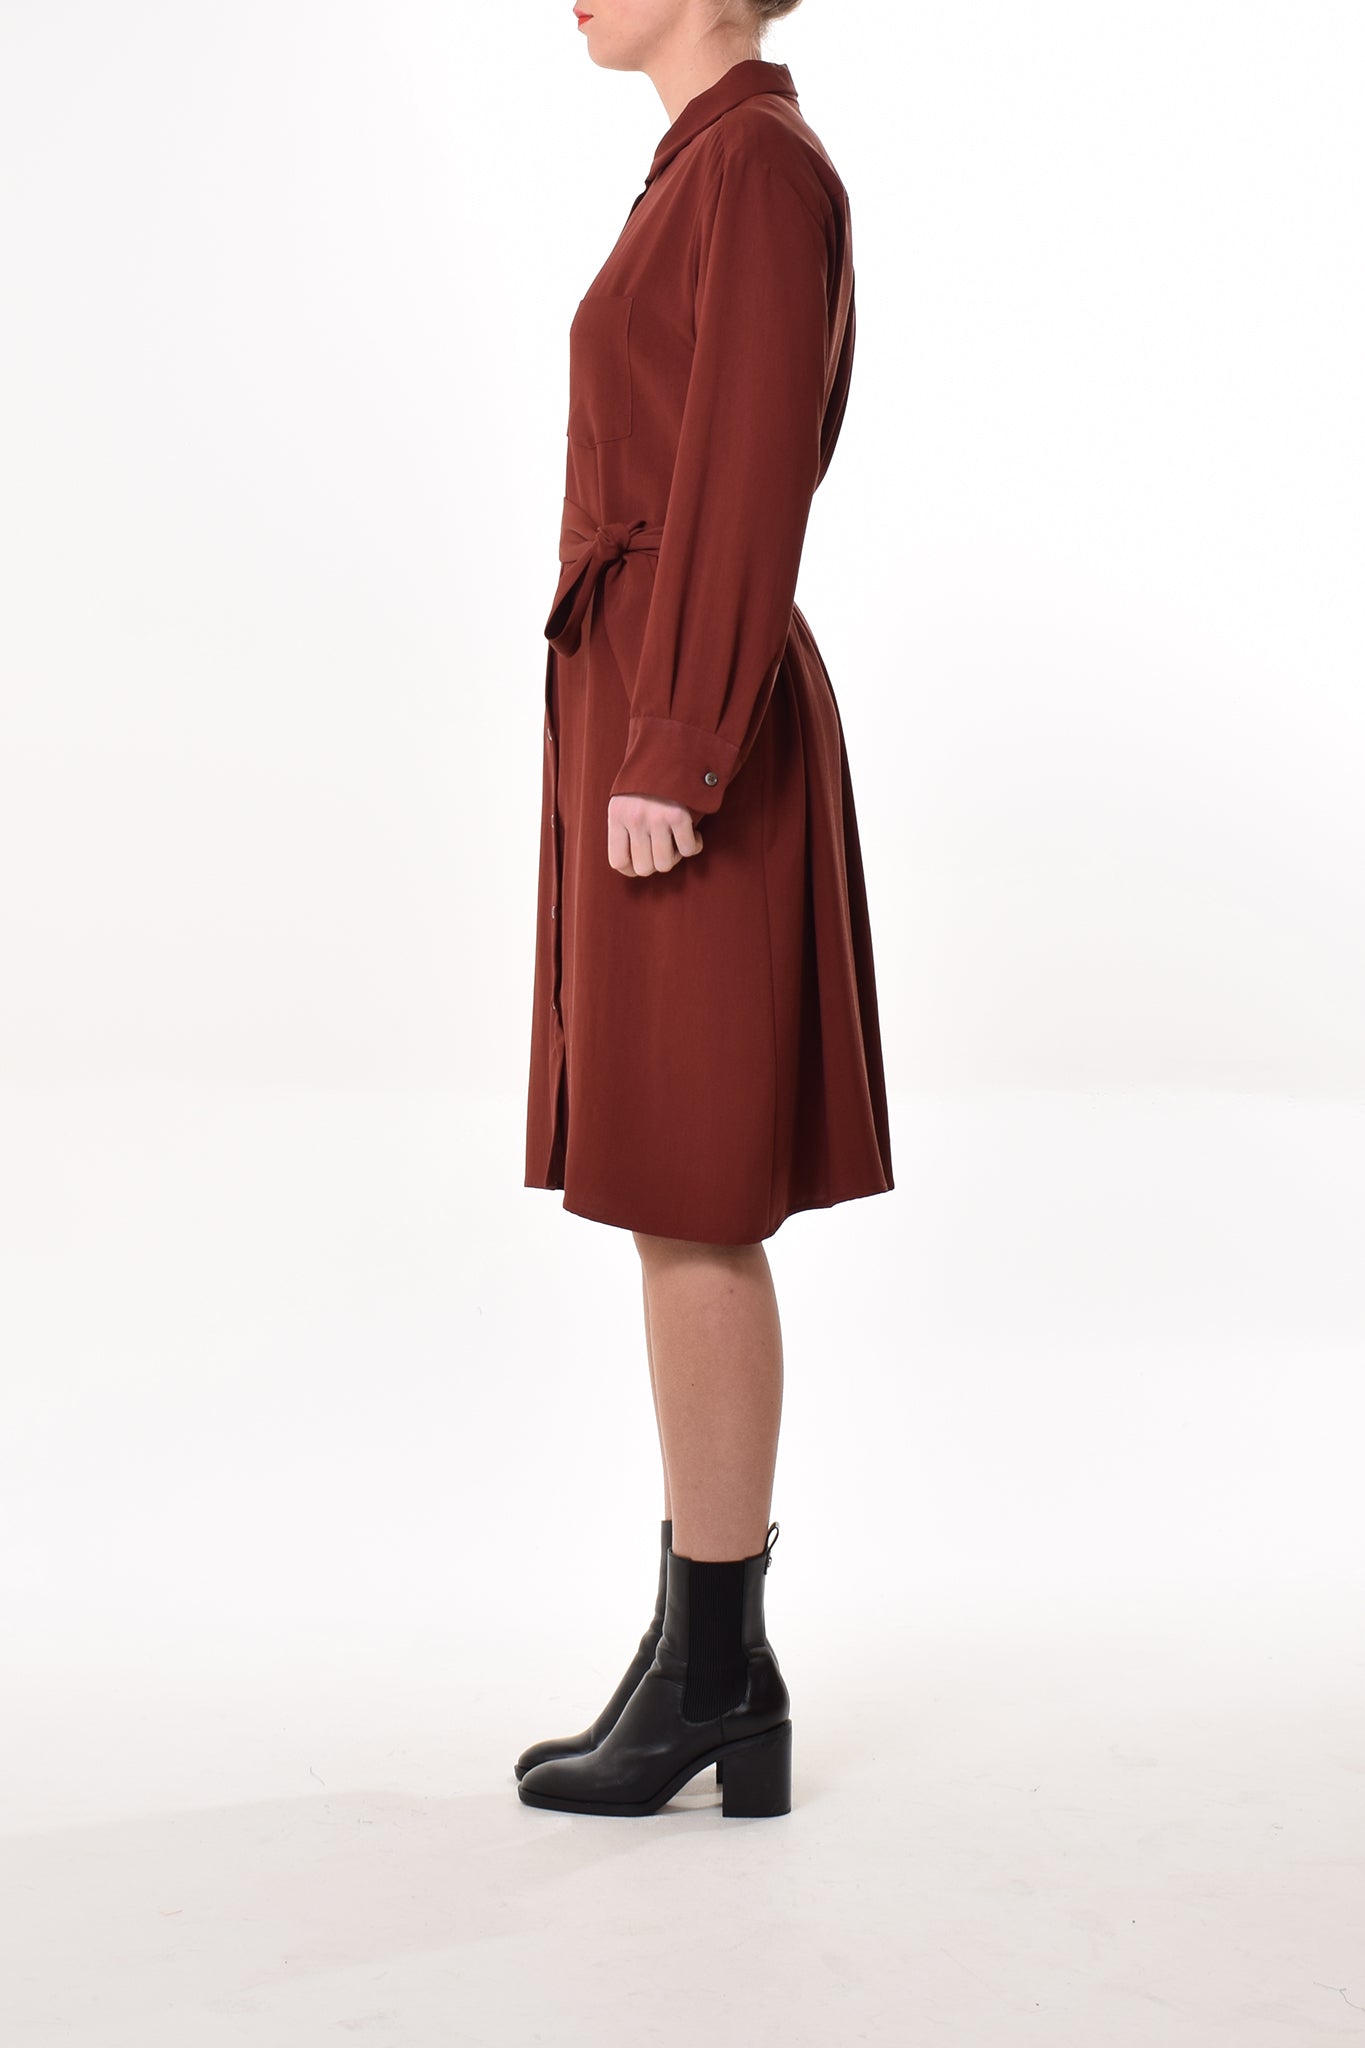 Aigle dress in Brown (solid)